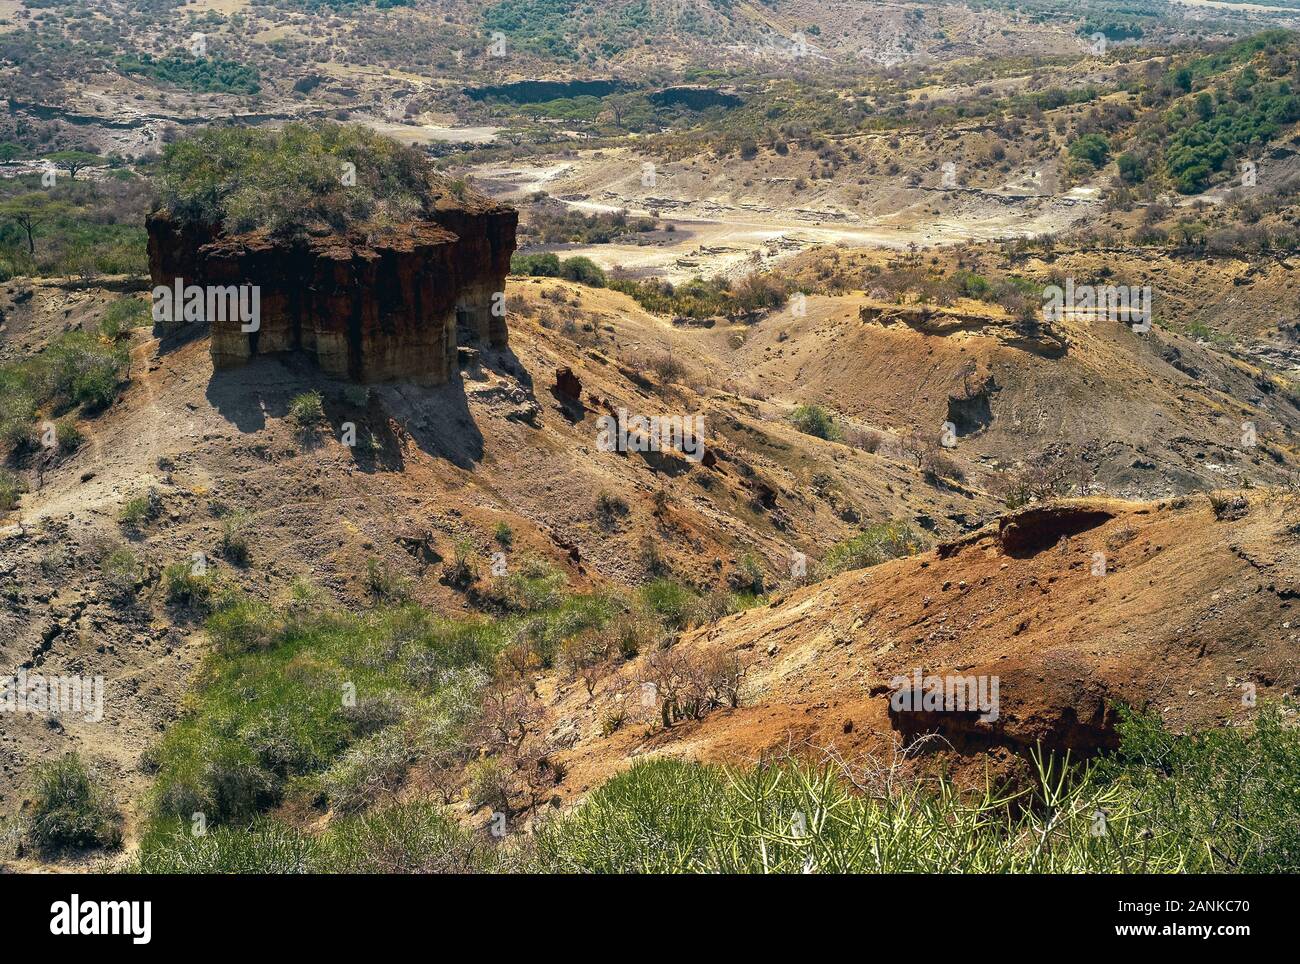 Olduvai Gorge Scenic View in the Great Rift Valley, Tanzania, East Africa. An Important Paleoanthropological Site. Stock Photo